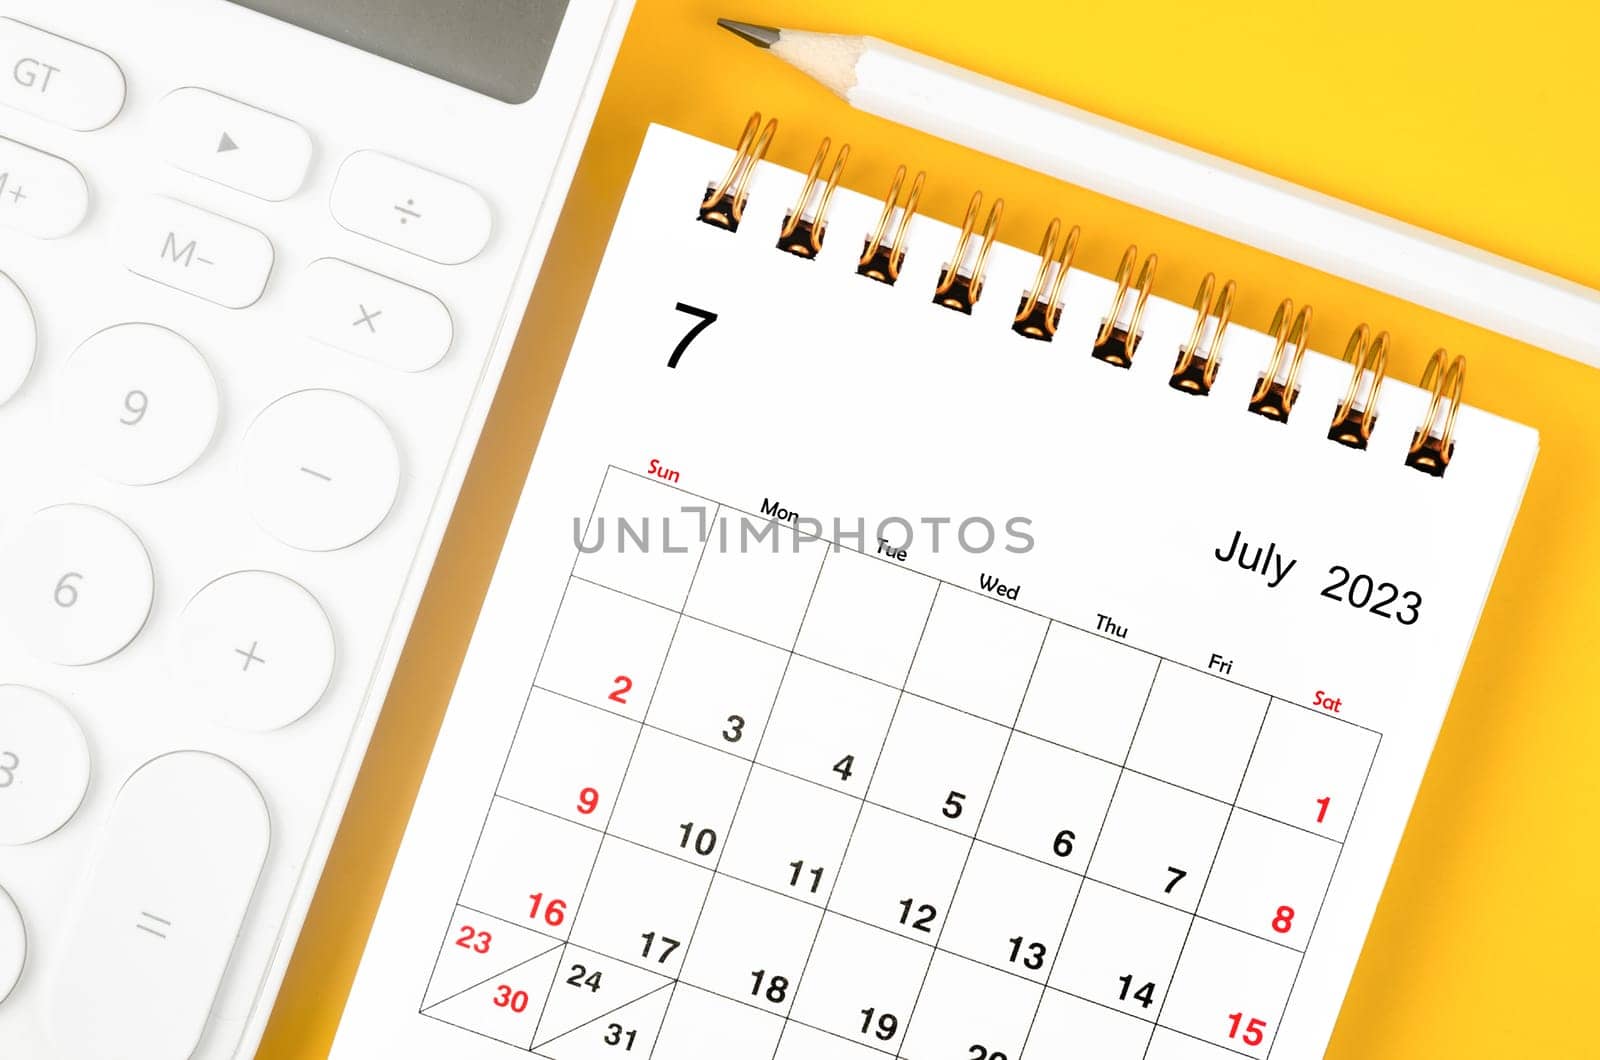 The July 2023 Monthly desk calendar for 2023 year and calculator with pen on yellow background. by Gamjai